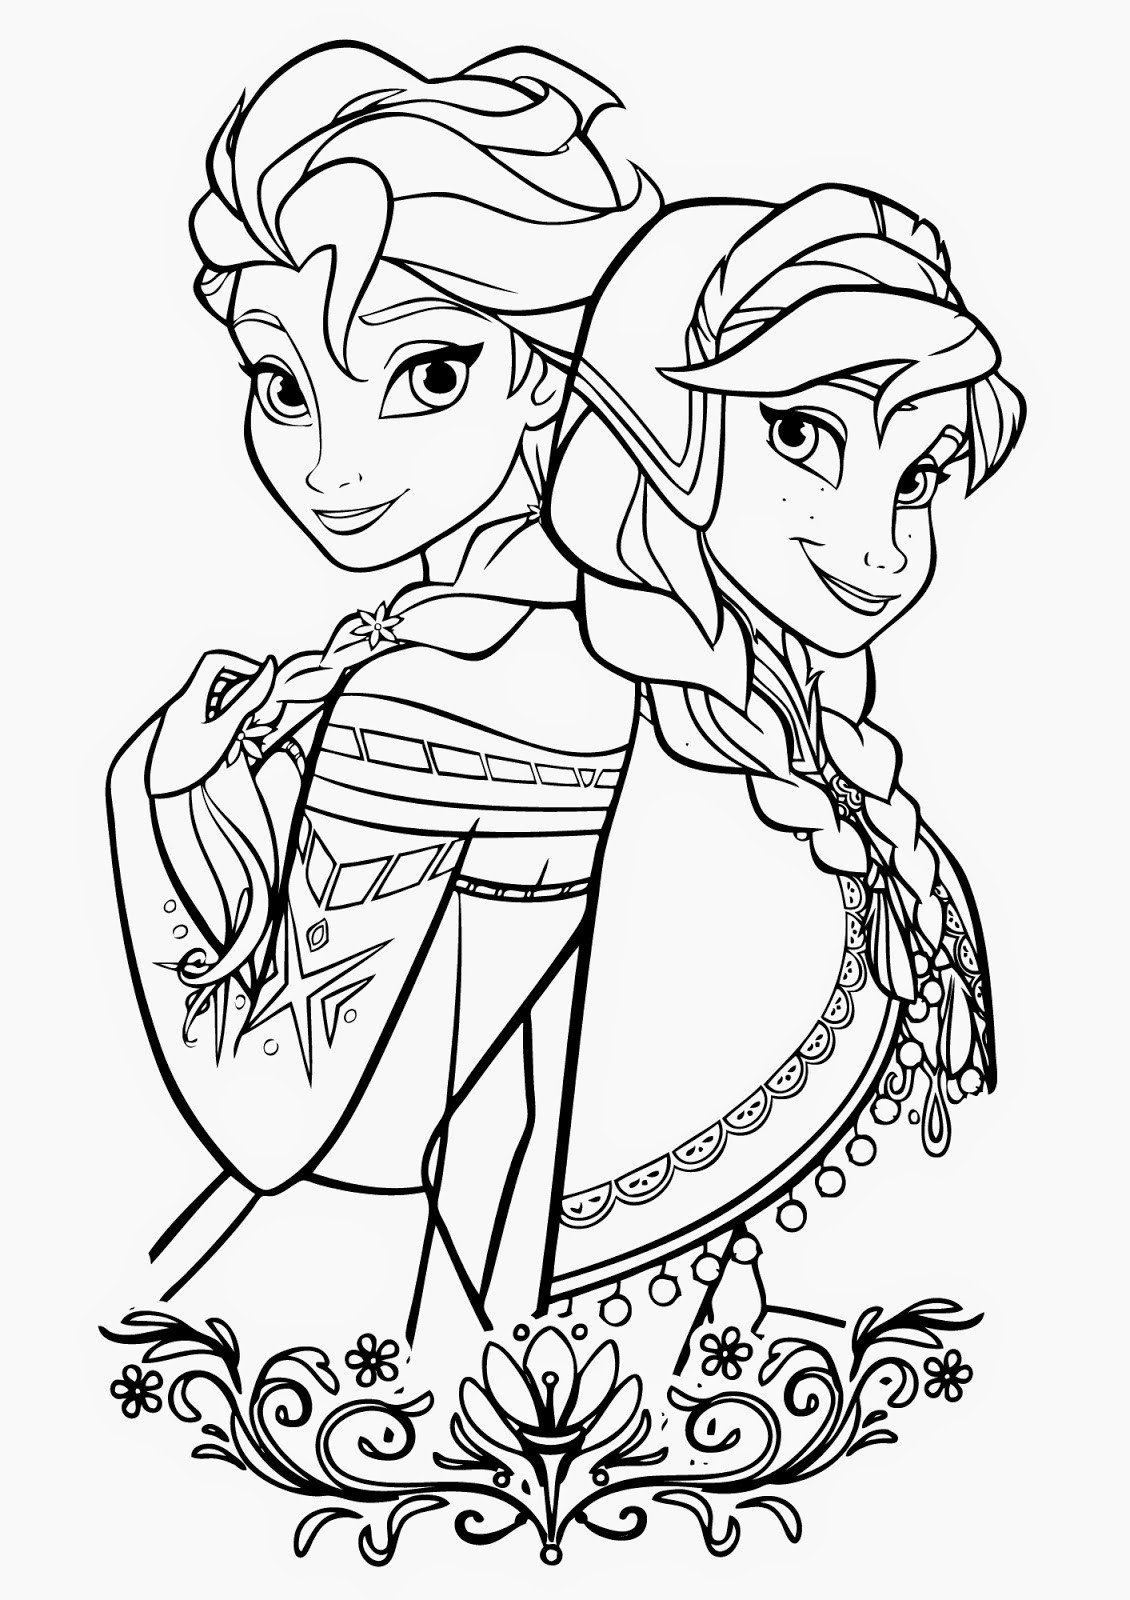 Printable Coloring Pages Disney
 15 Beautiful Disney Frozen Coloring Pages Free Instant